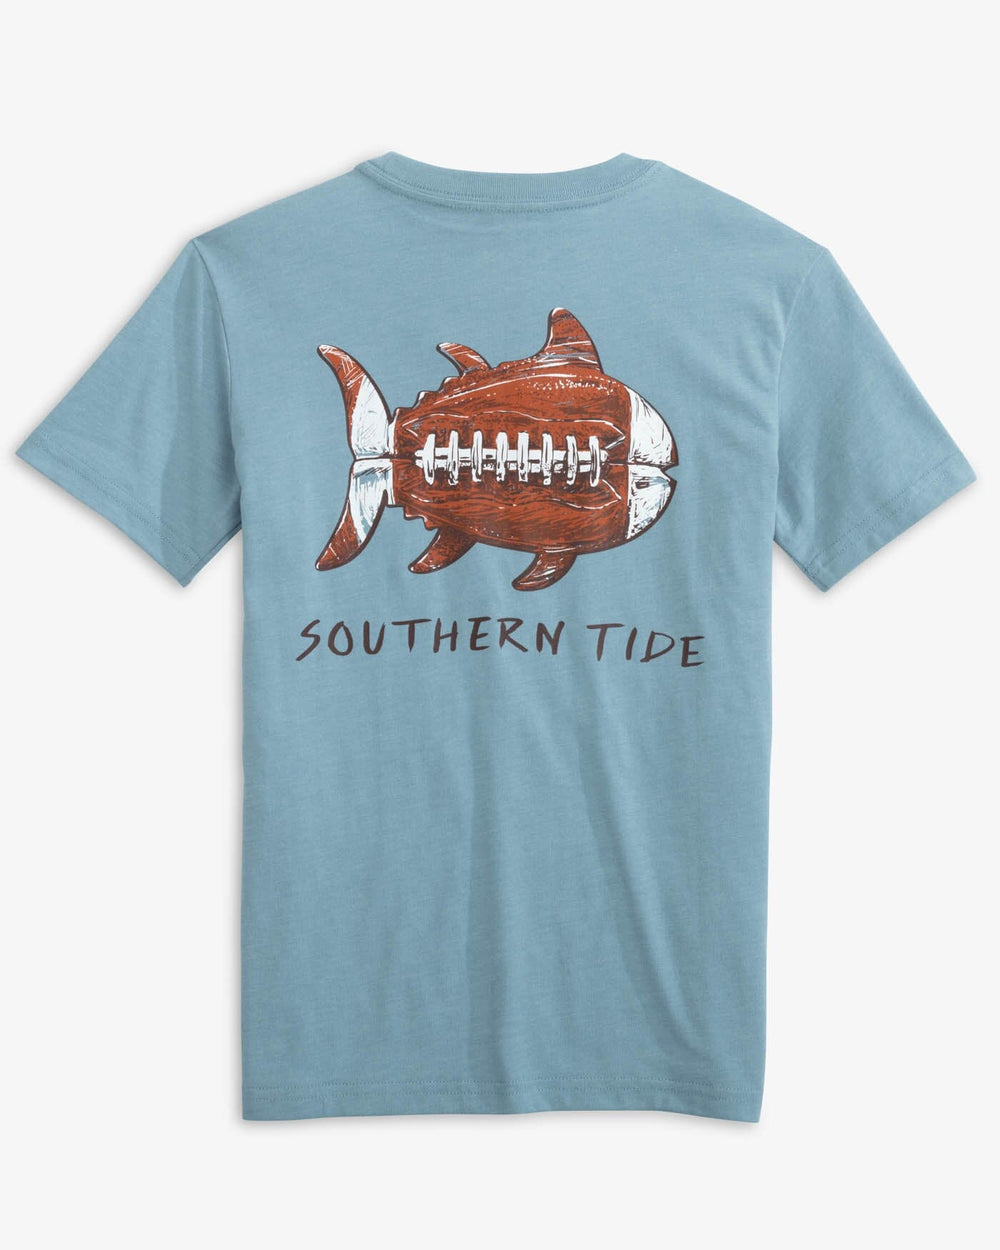 The back view of the Southern Tide Kids Sketched Football Heather T-Shirt by Southern Tide - Heather Blue Shadow